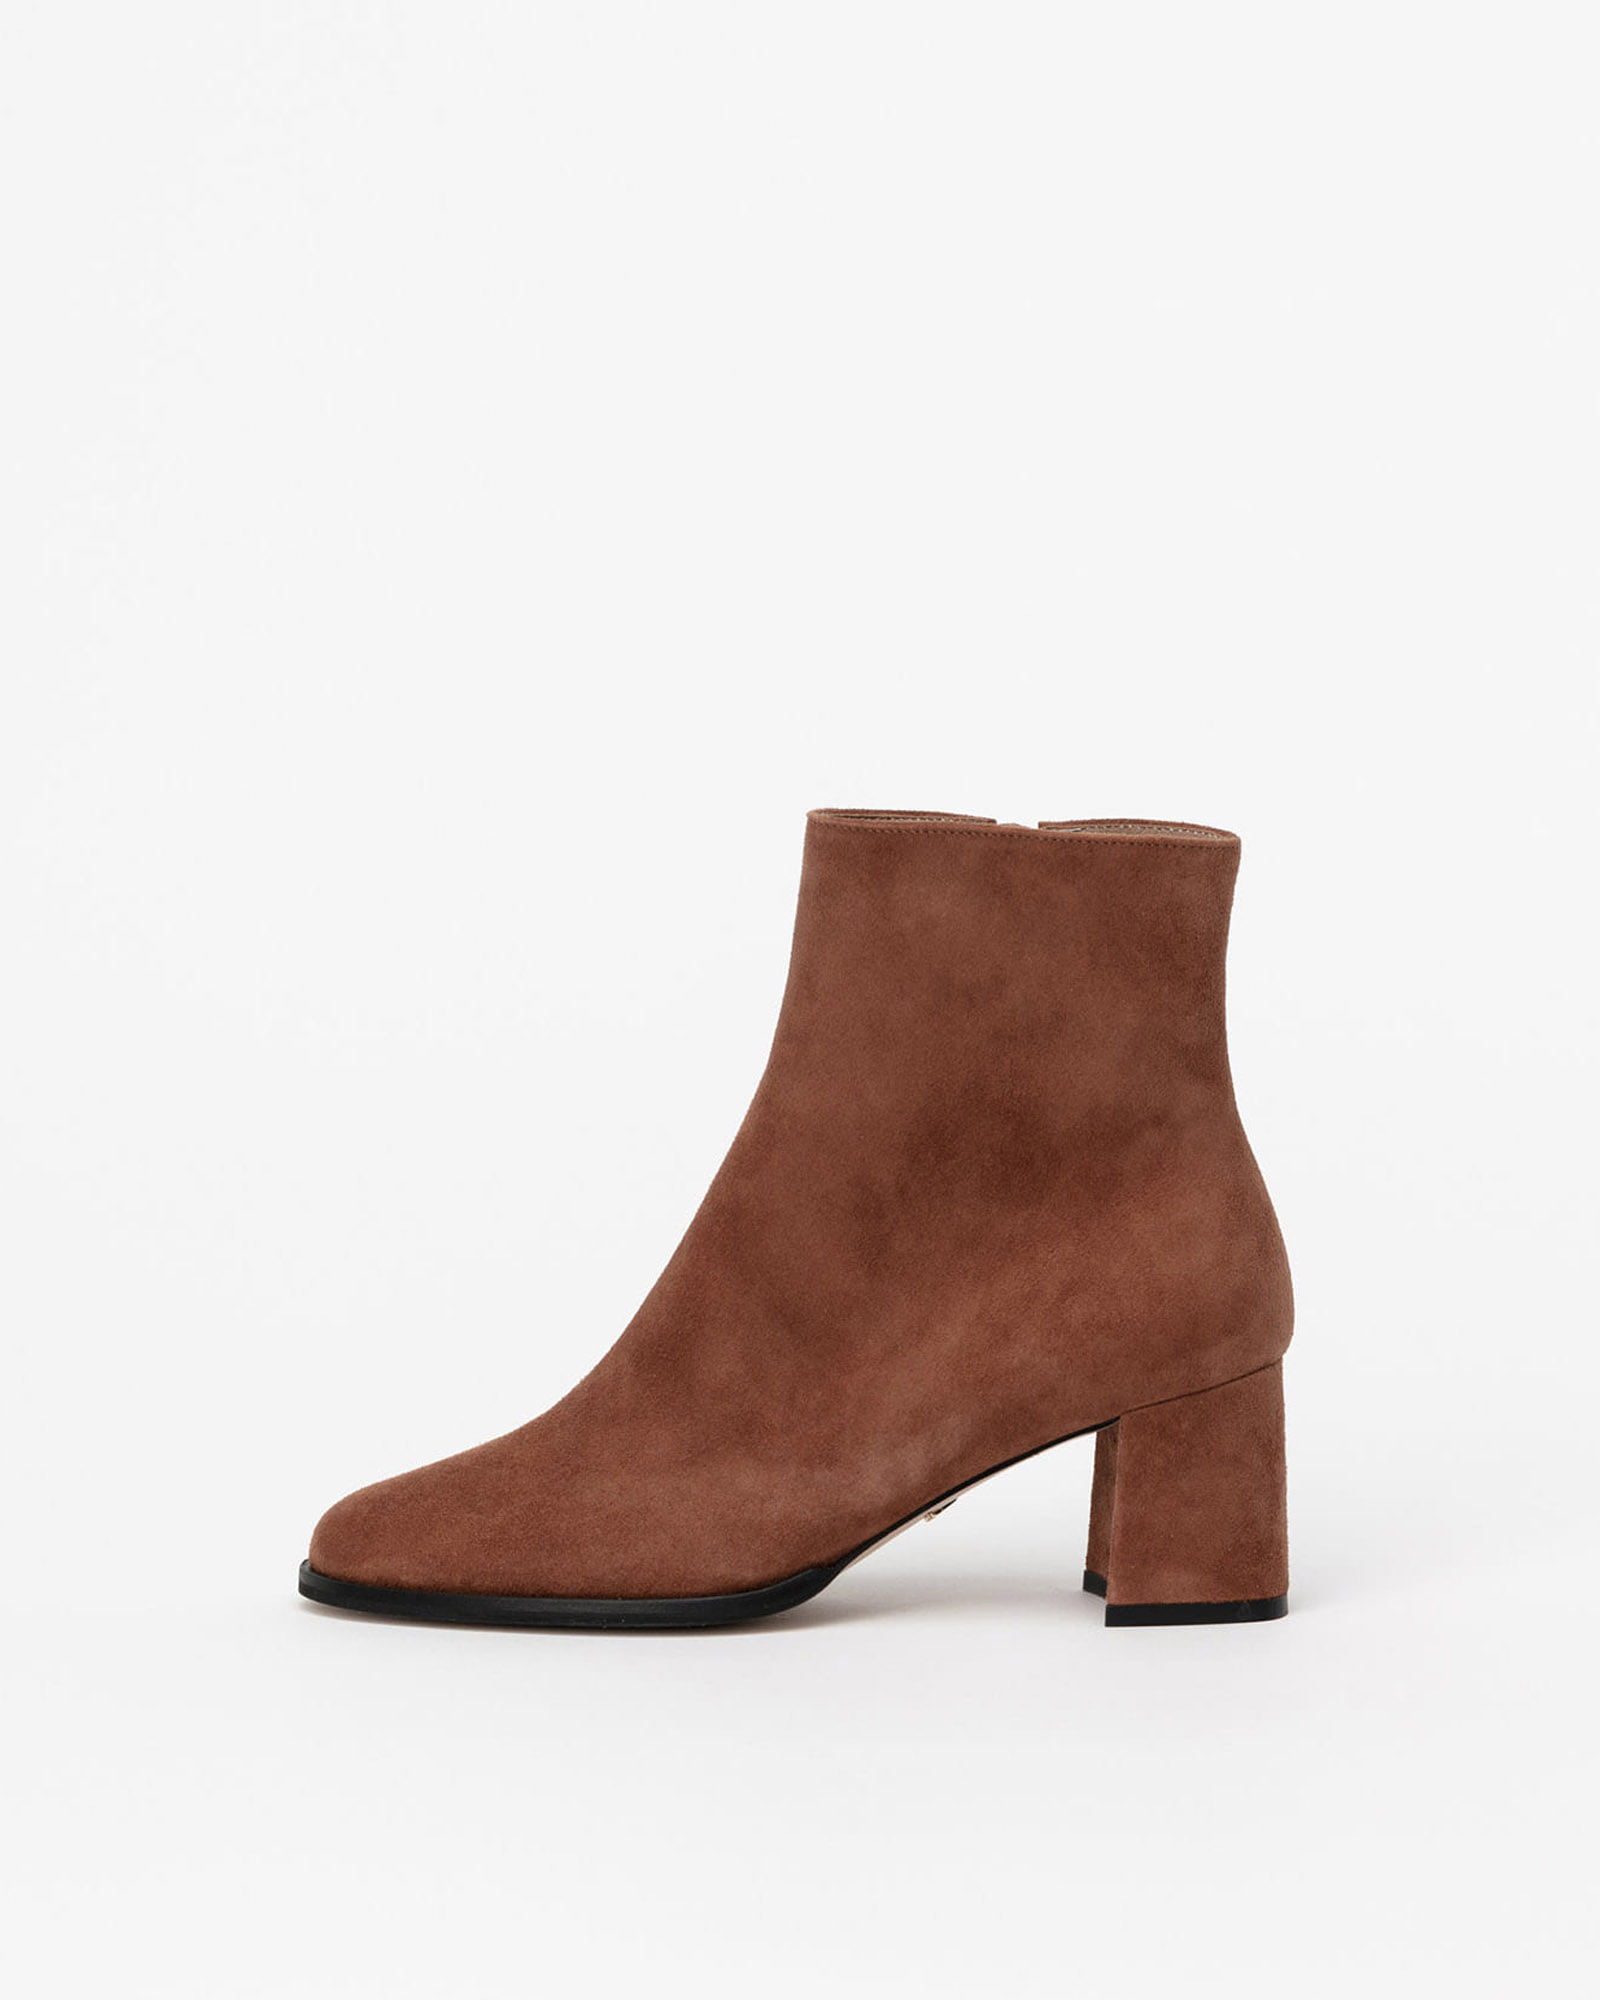 Polka Boots in Mocha Brown Suede